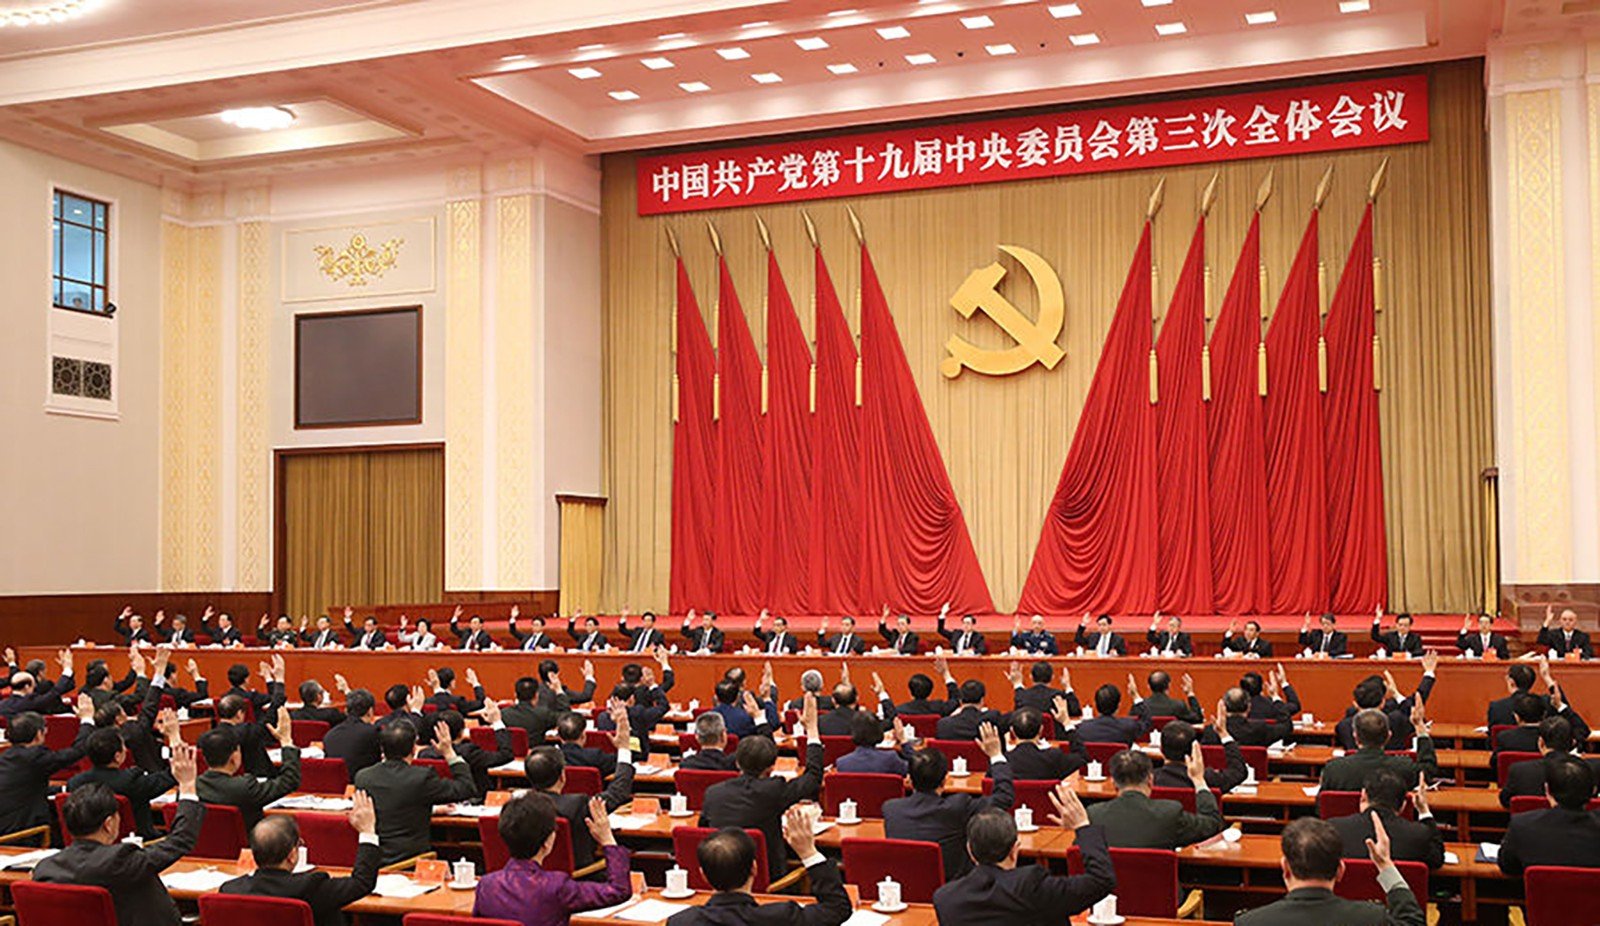 The roughly 300 members of the Communist Party’s Central Committee will meet in Beijing next week. Photo: Xinhua